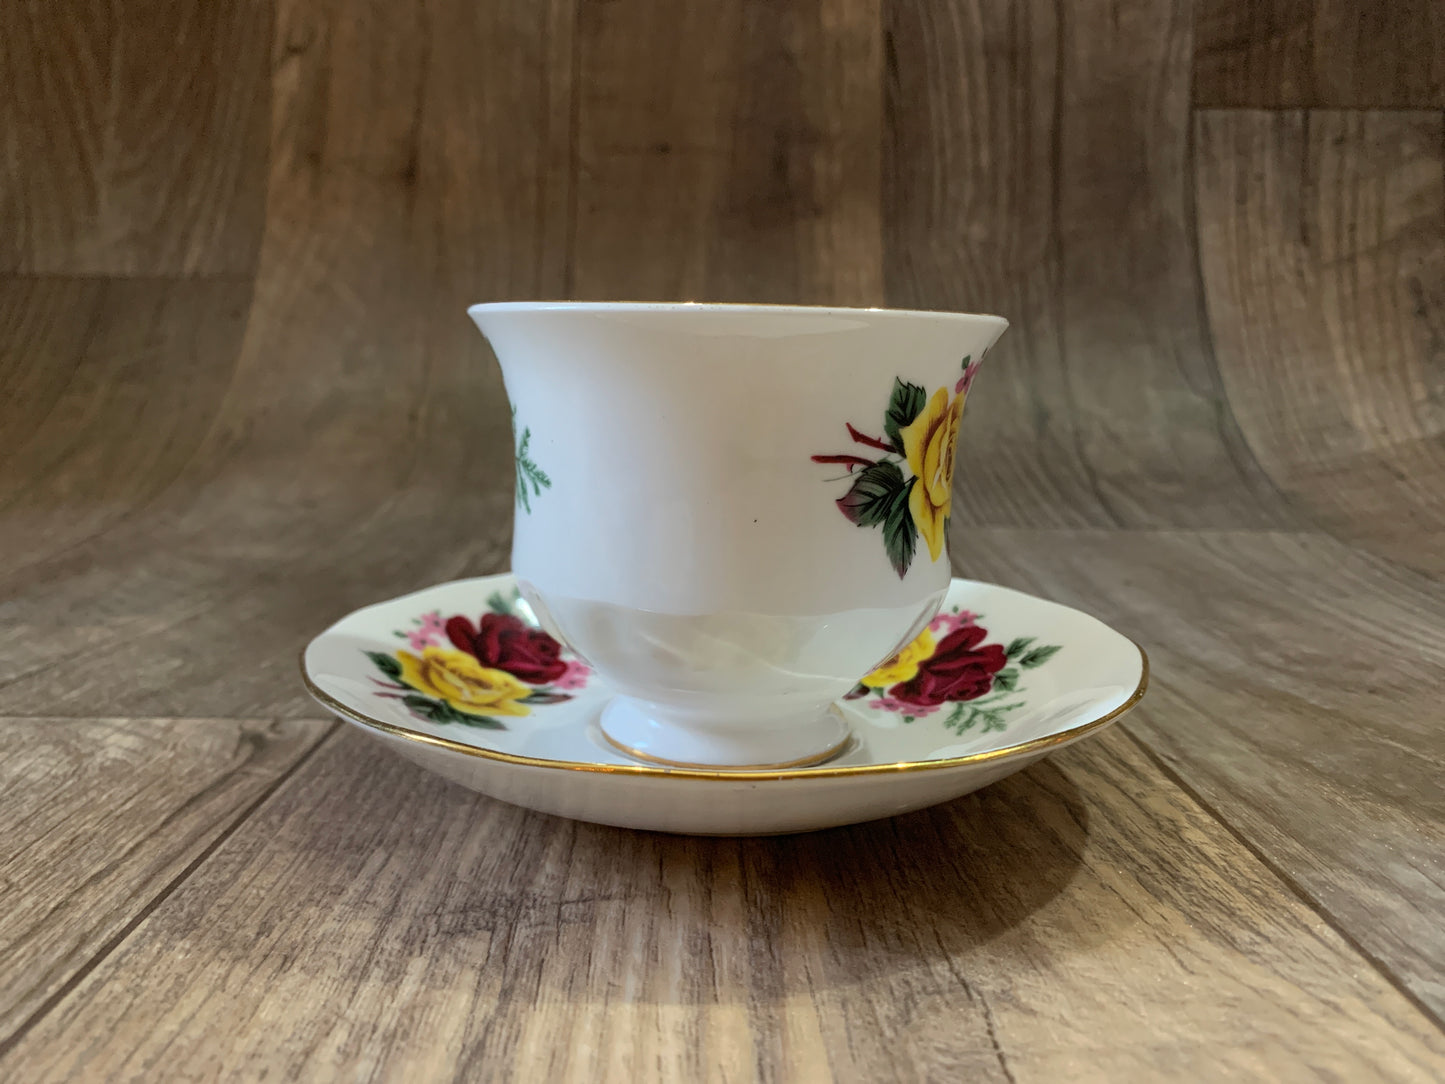 Vintage Teacup with Red and Yellow Rose Floral Pattern Queen Anne Tea Cup and Saucer